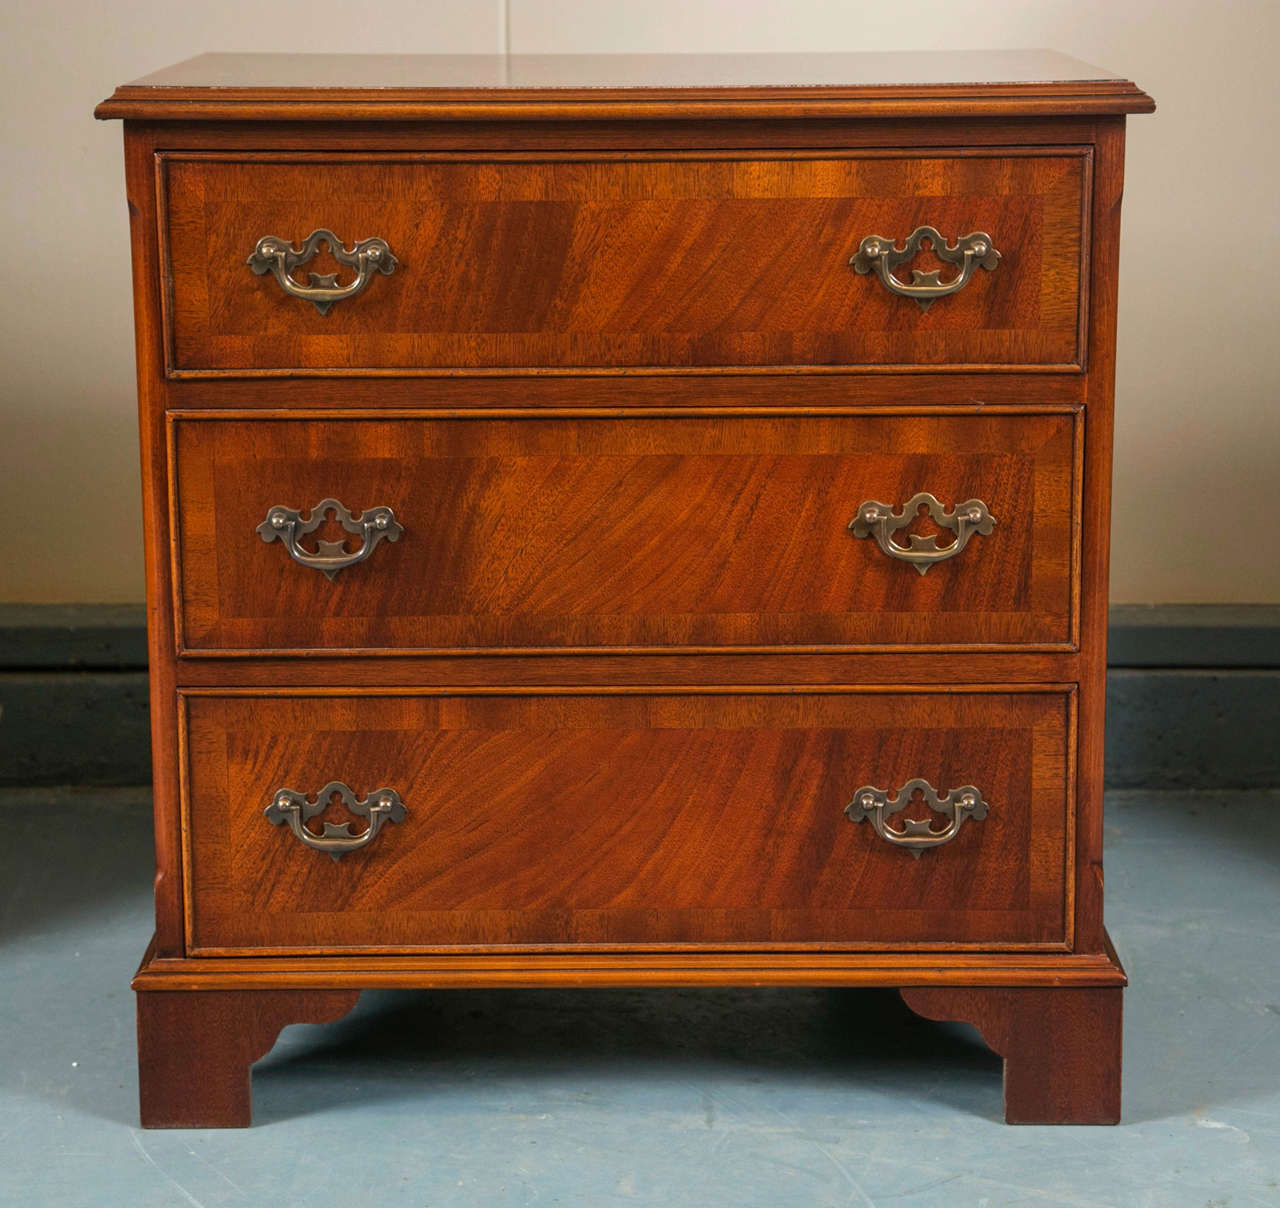 Custom made for us by English cabinet makers, this Classic little three-drawer chest in flame mahogany has chamfered corners and rests on bracket feet. The top and drawer fronts are cross banded in a sedate, straight grain mahogany that frames the